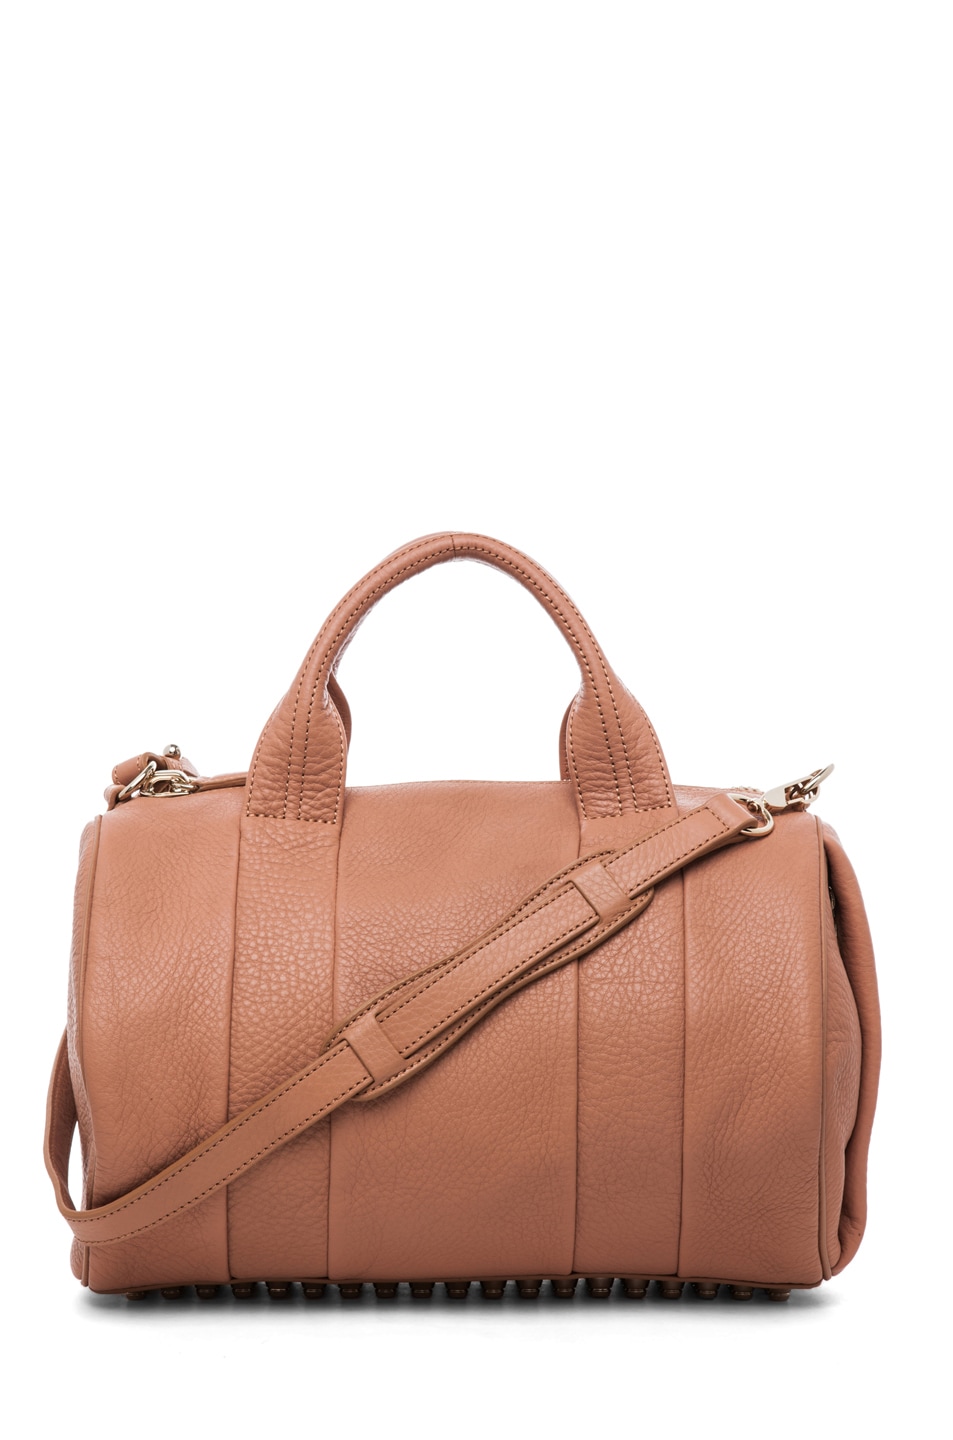 Image 1 of Alexander Wang Rocco Soft Pebble Leather Bag in Tan